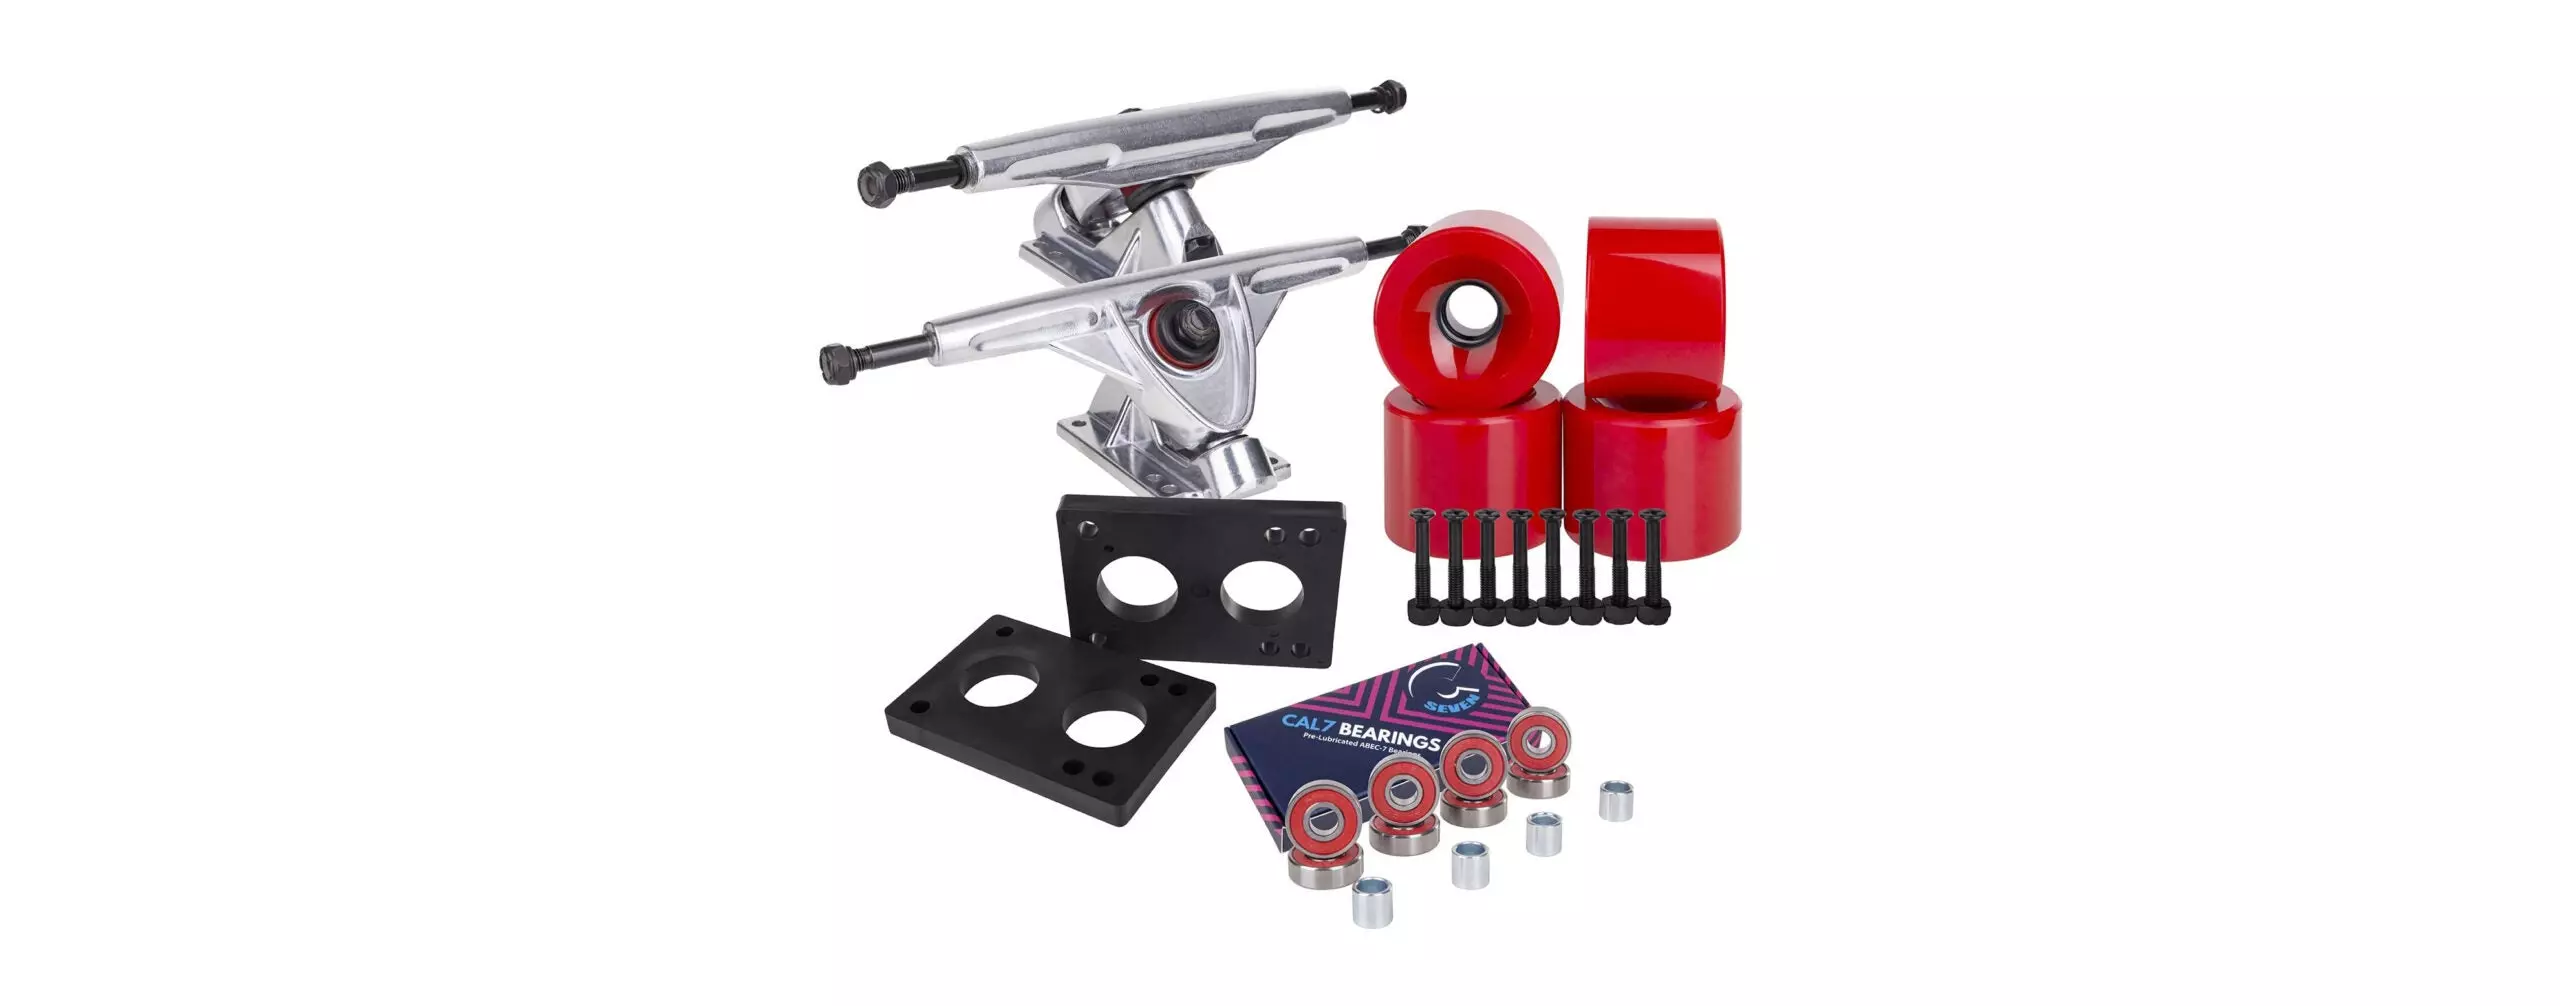 The Best Longboard Trucks (Review & Buying Guide) in 2022